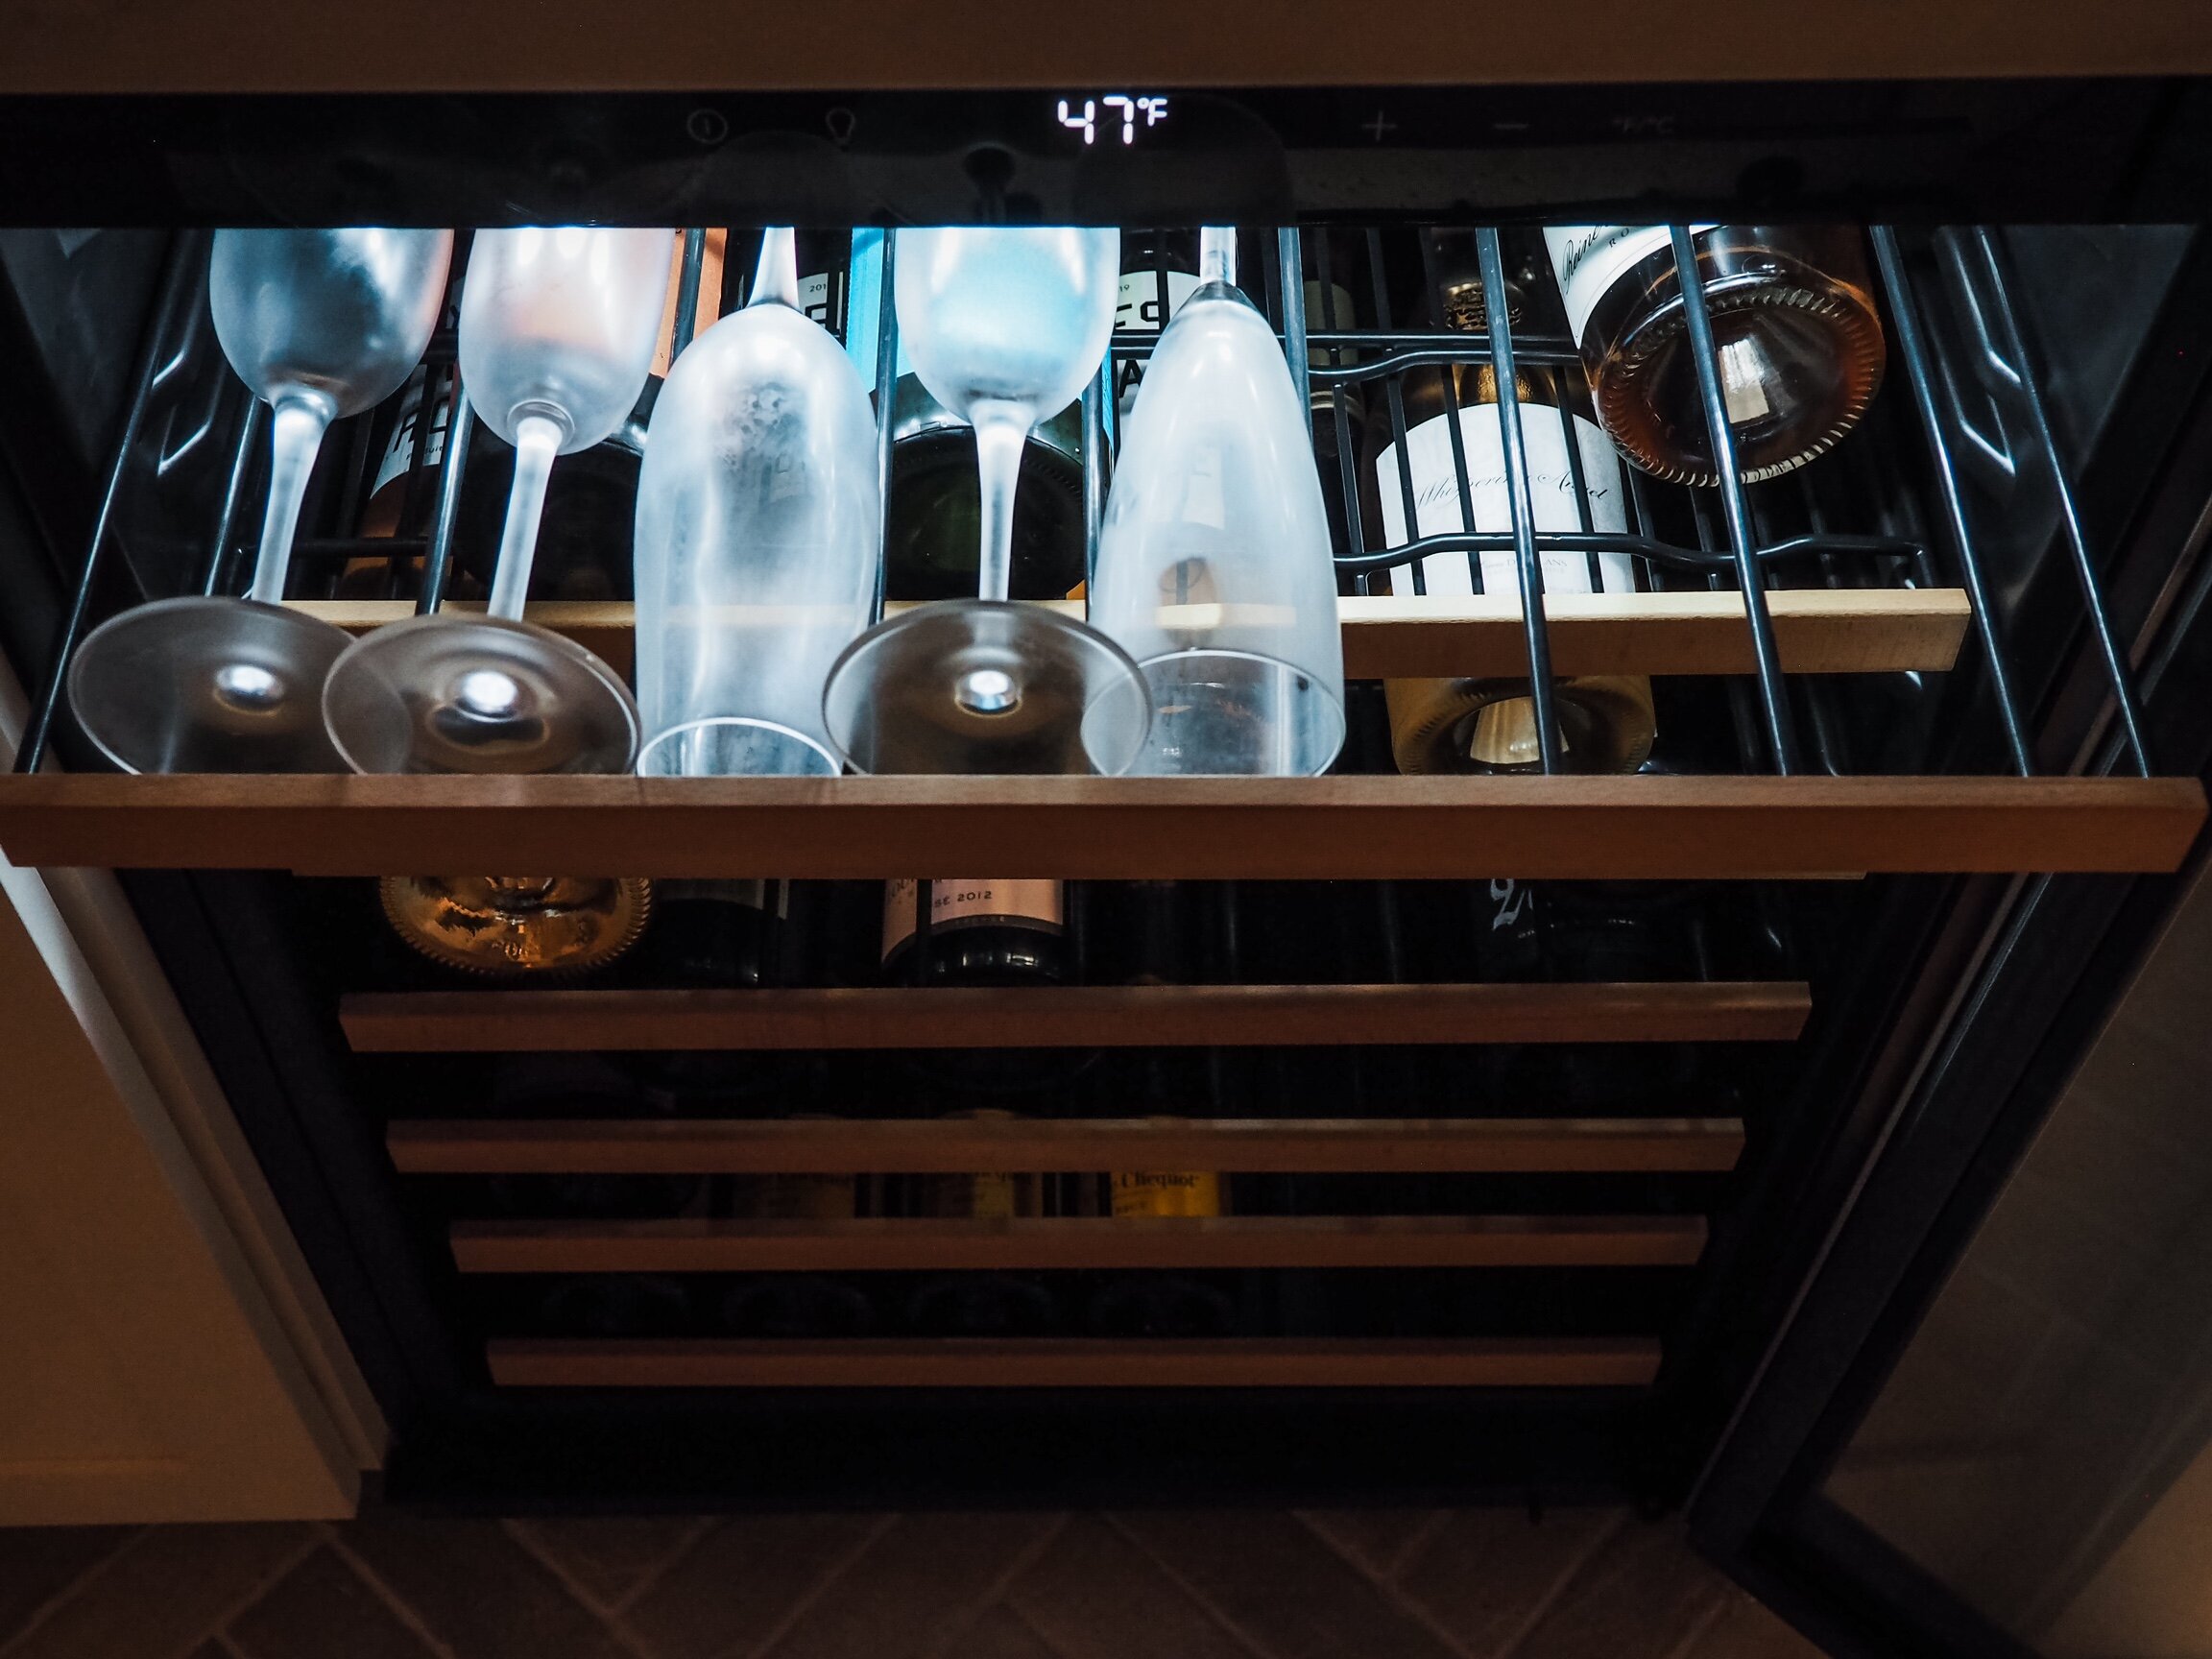 While we make an exception for a few white and rosé wines, this is primarily a Champagne refrigerator kept at an optimal 47°F. I keep Champagne flutes in the top shelf of the fridge so we can always enjoy a chilled glass.